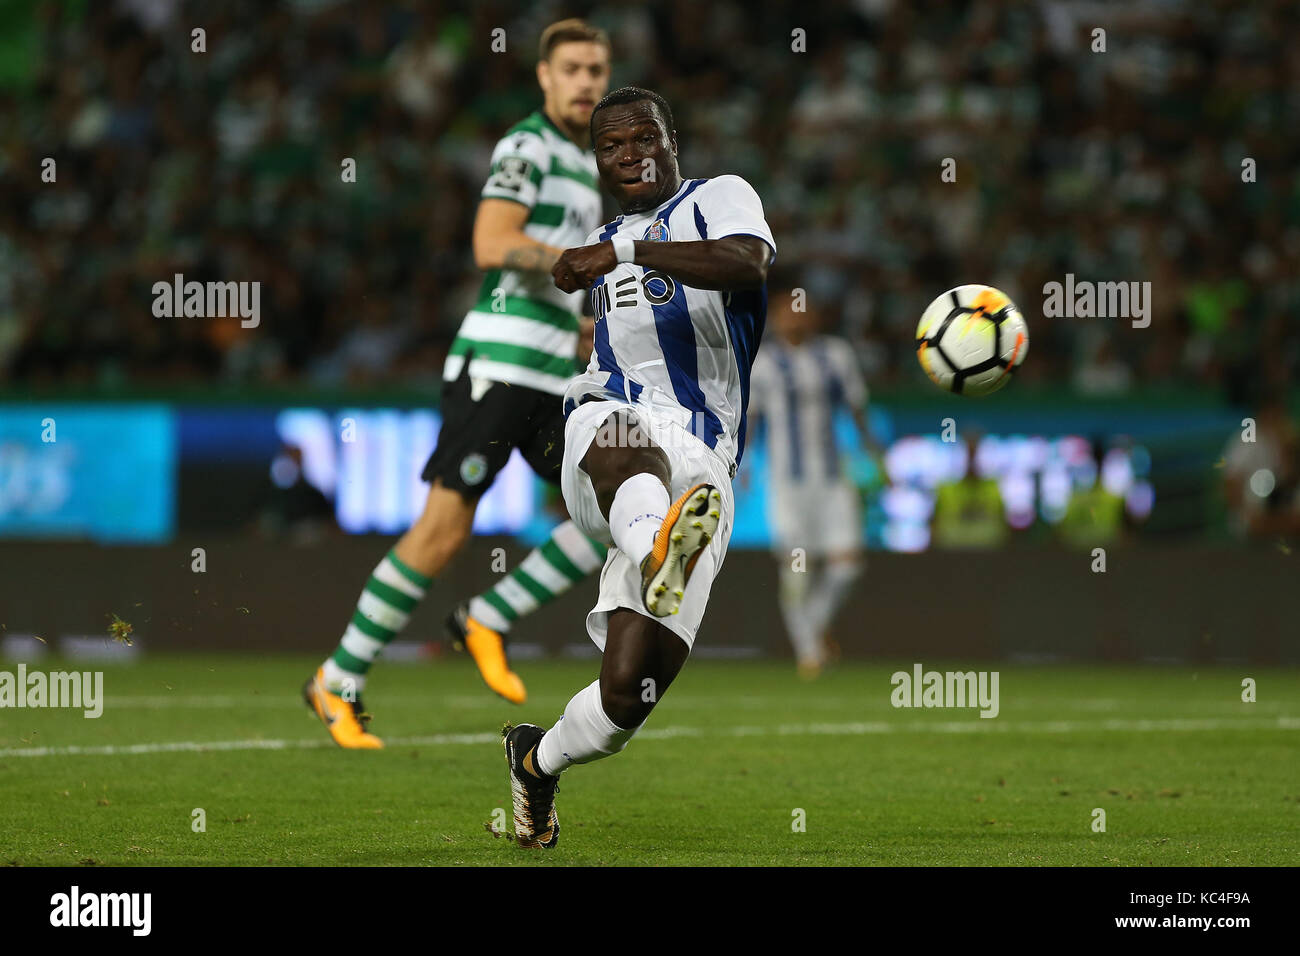 Lisbon, Portugal. 01st Oct, 2017. FC PortoÕs forward Vincent Aboubakar from Cameroon during Premier League 2017/18 match between Sporting CP and FC Porto, at Alvalade Stadium in Lisbon on October 1, 2017. (Photo by Bruno Barros / DPI) Credit: Bruno Barros/Alamy Live News Stock Photo